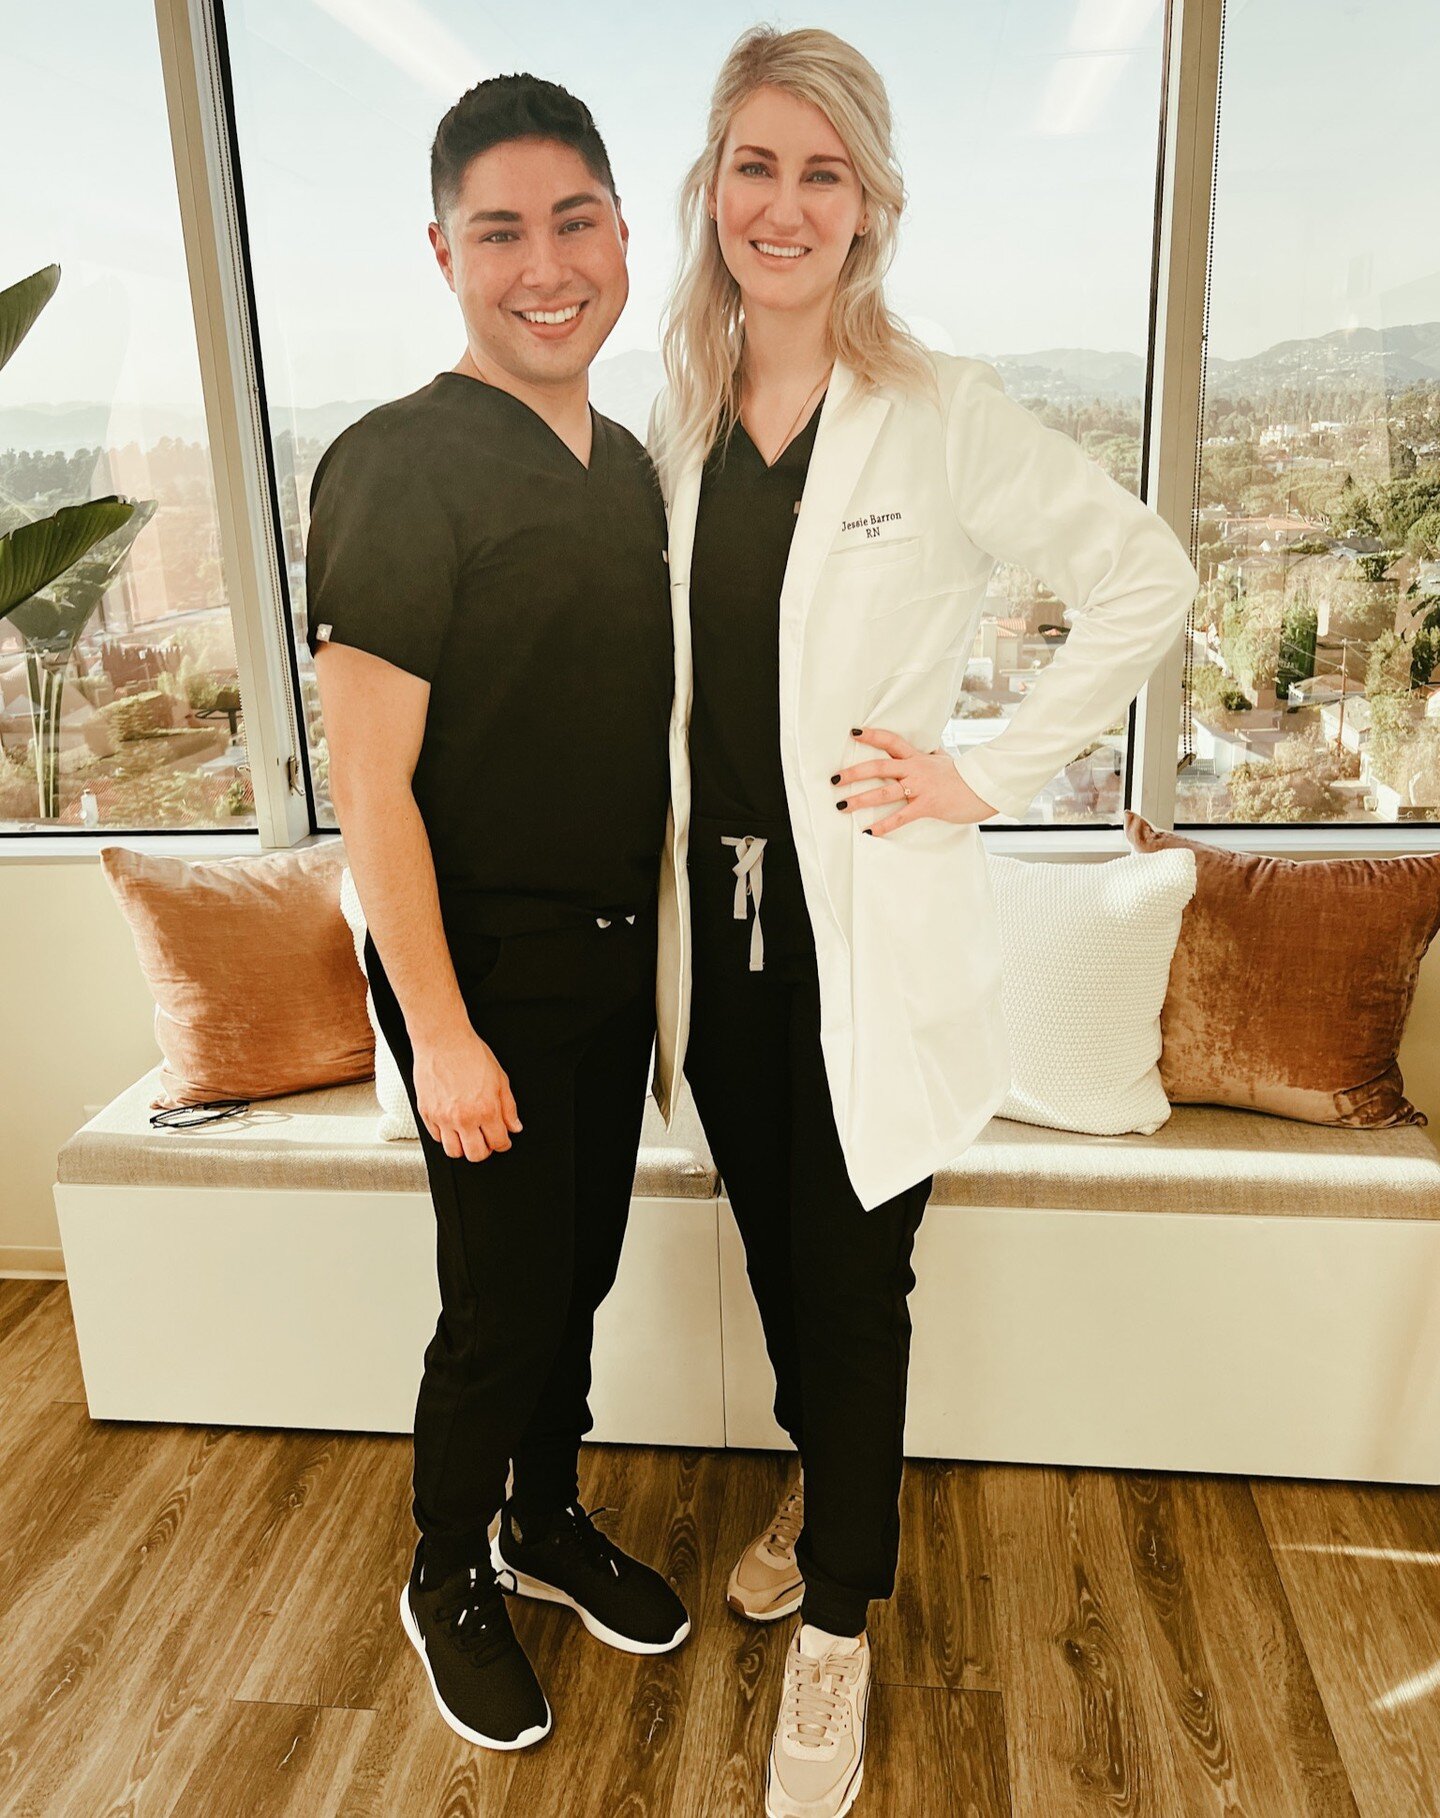 I had the absolute pleasure of training with @jessie.barron.rn @injection_u in beautiful Santa Monica, California.

I have to say, I've come a long way from where I started as an aesthetic injector. I am proud of the skill and confidence I have earne